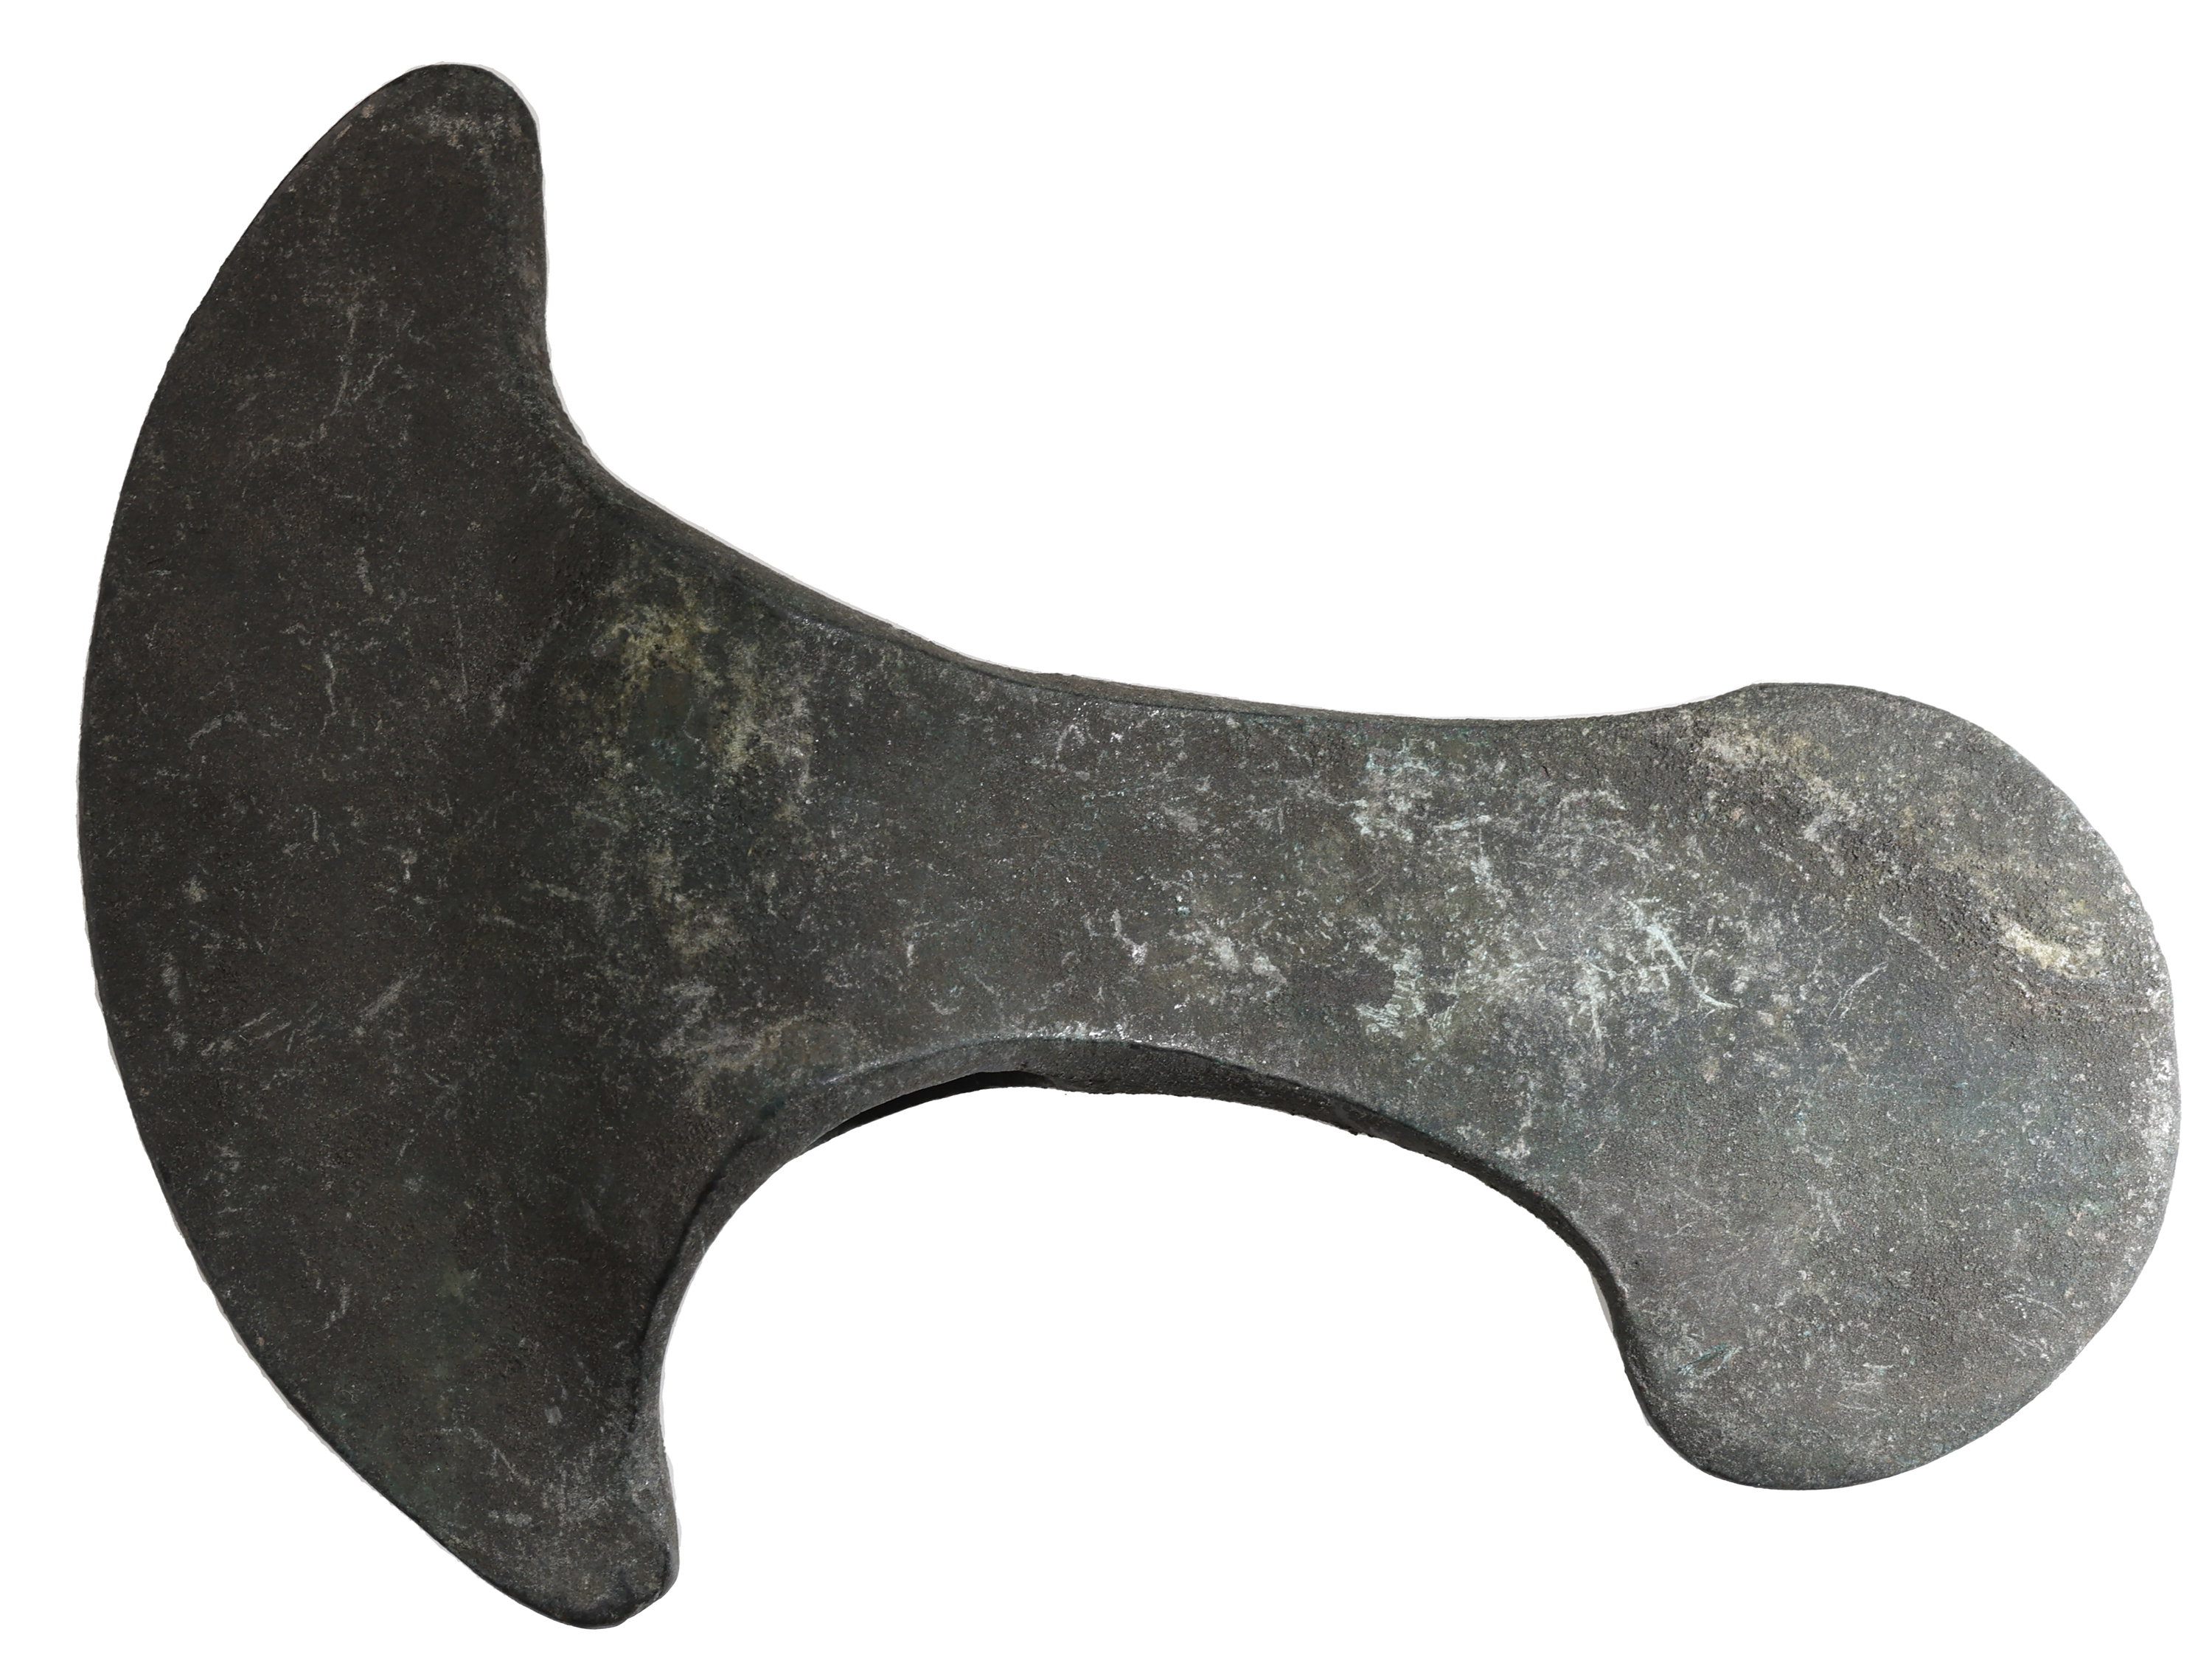 Near Eastern, bronze axe, c. 1,200 BC, 125mm x 93mm, oval sectioned shaft hole, expanded cur... - Image 3 of 4